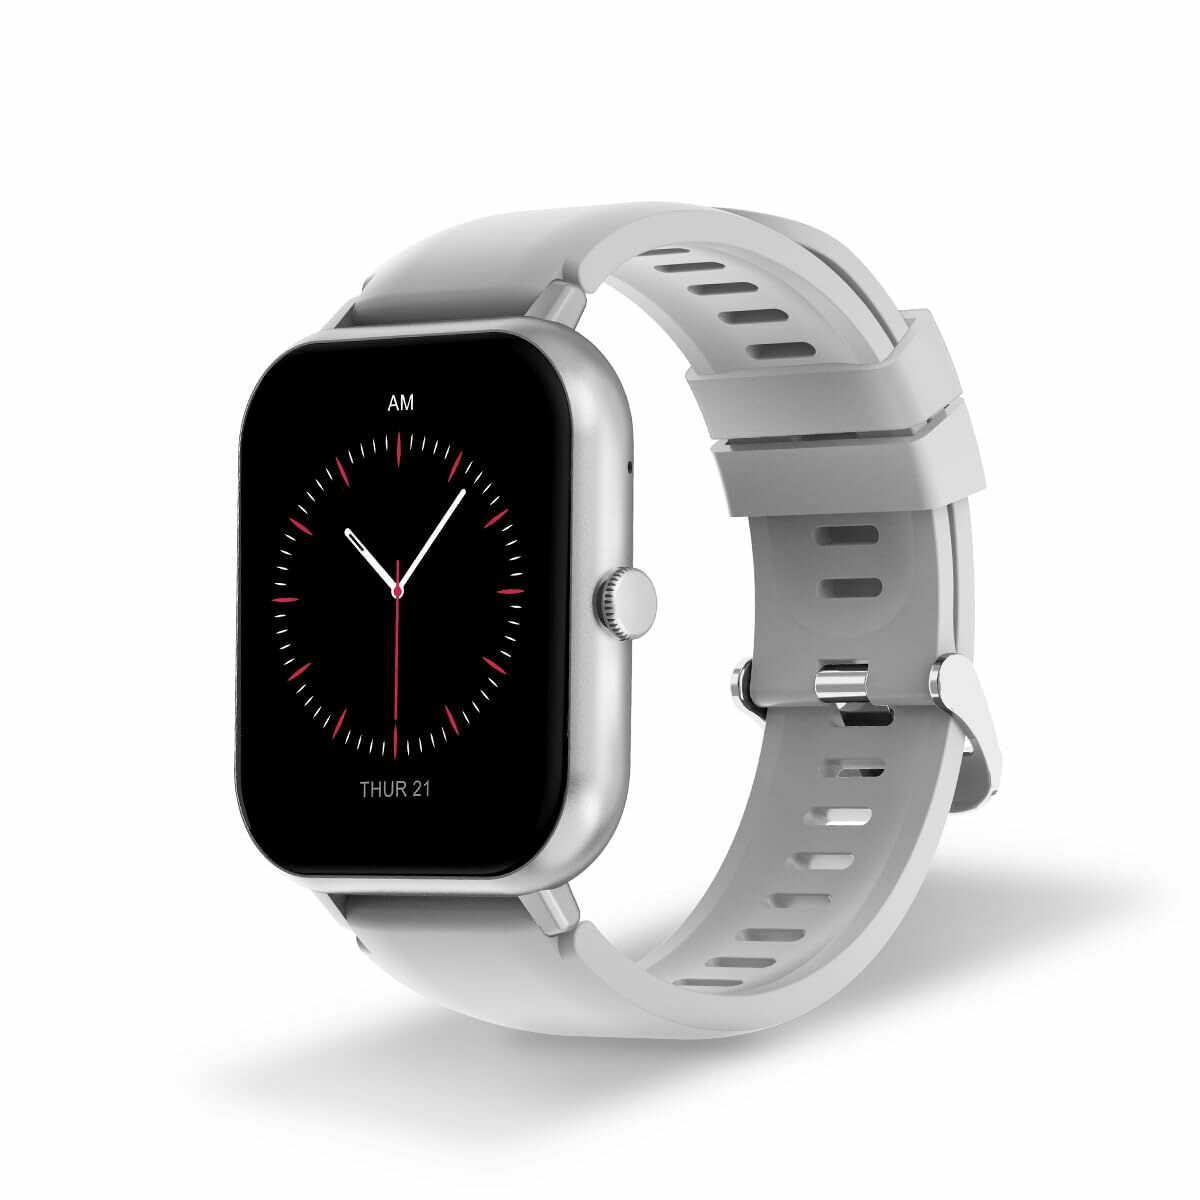 Smartwatch DCU CURVED GLASS PRO 1,83" Grey, DCU Tecnologic, Electronics, smartwatch-dcu-curved-glass-pro-1-83-grey, Brand_DCU Tecnologic, category-reference-2609, category-reference-2617, category-reference-2634, category-reference-t-19653, Condition_NEW, original gifts, Price_50 - 100, telephones & tablets, Teleworking, wifi y bluetooth, RiotNook